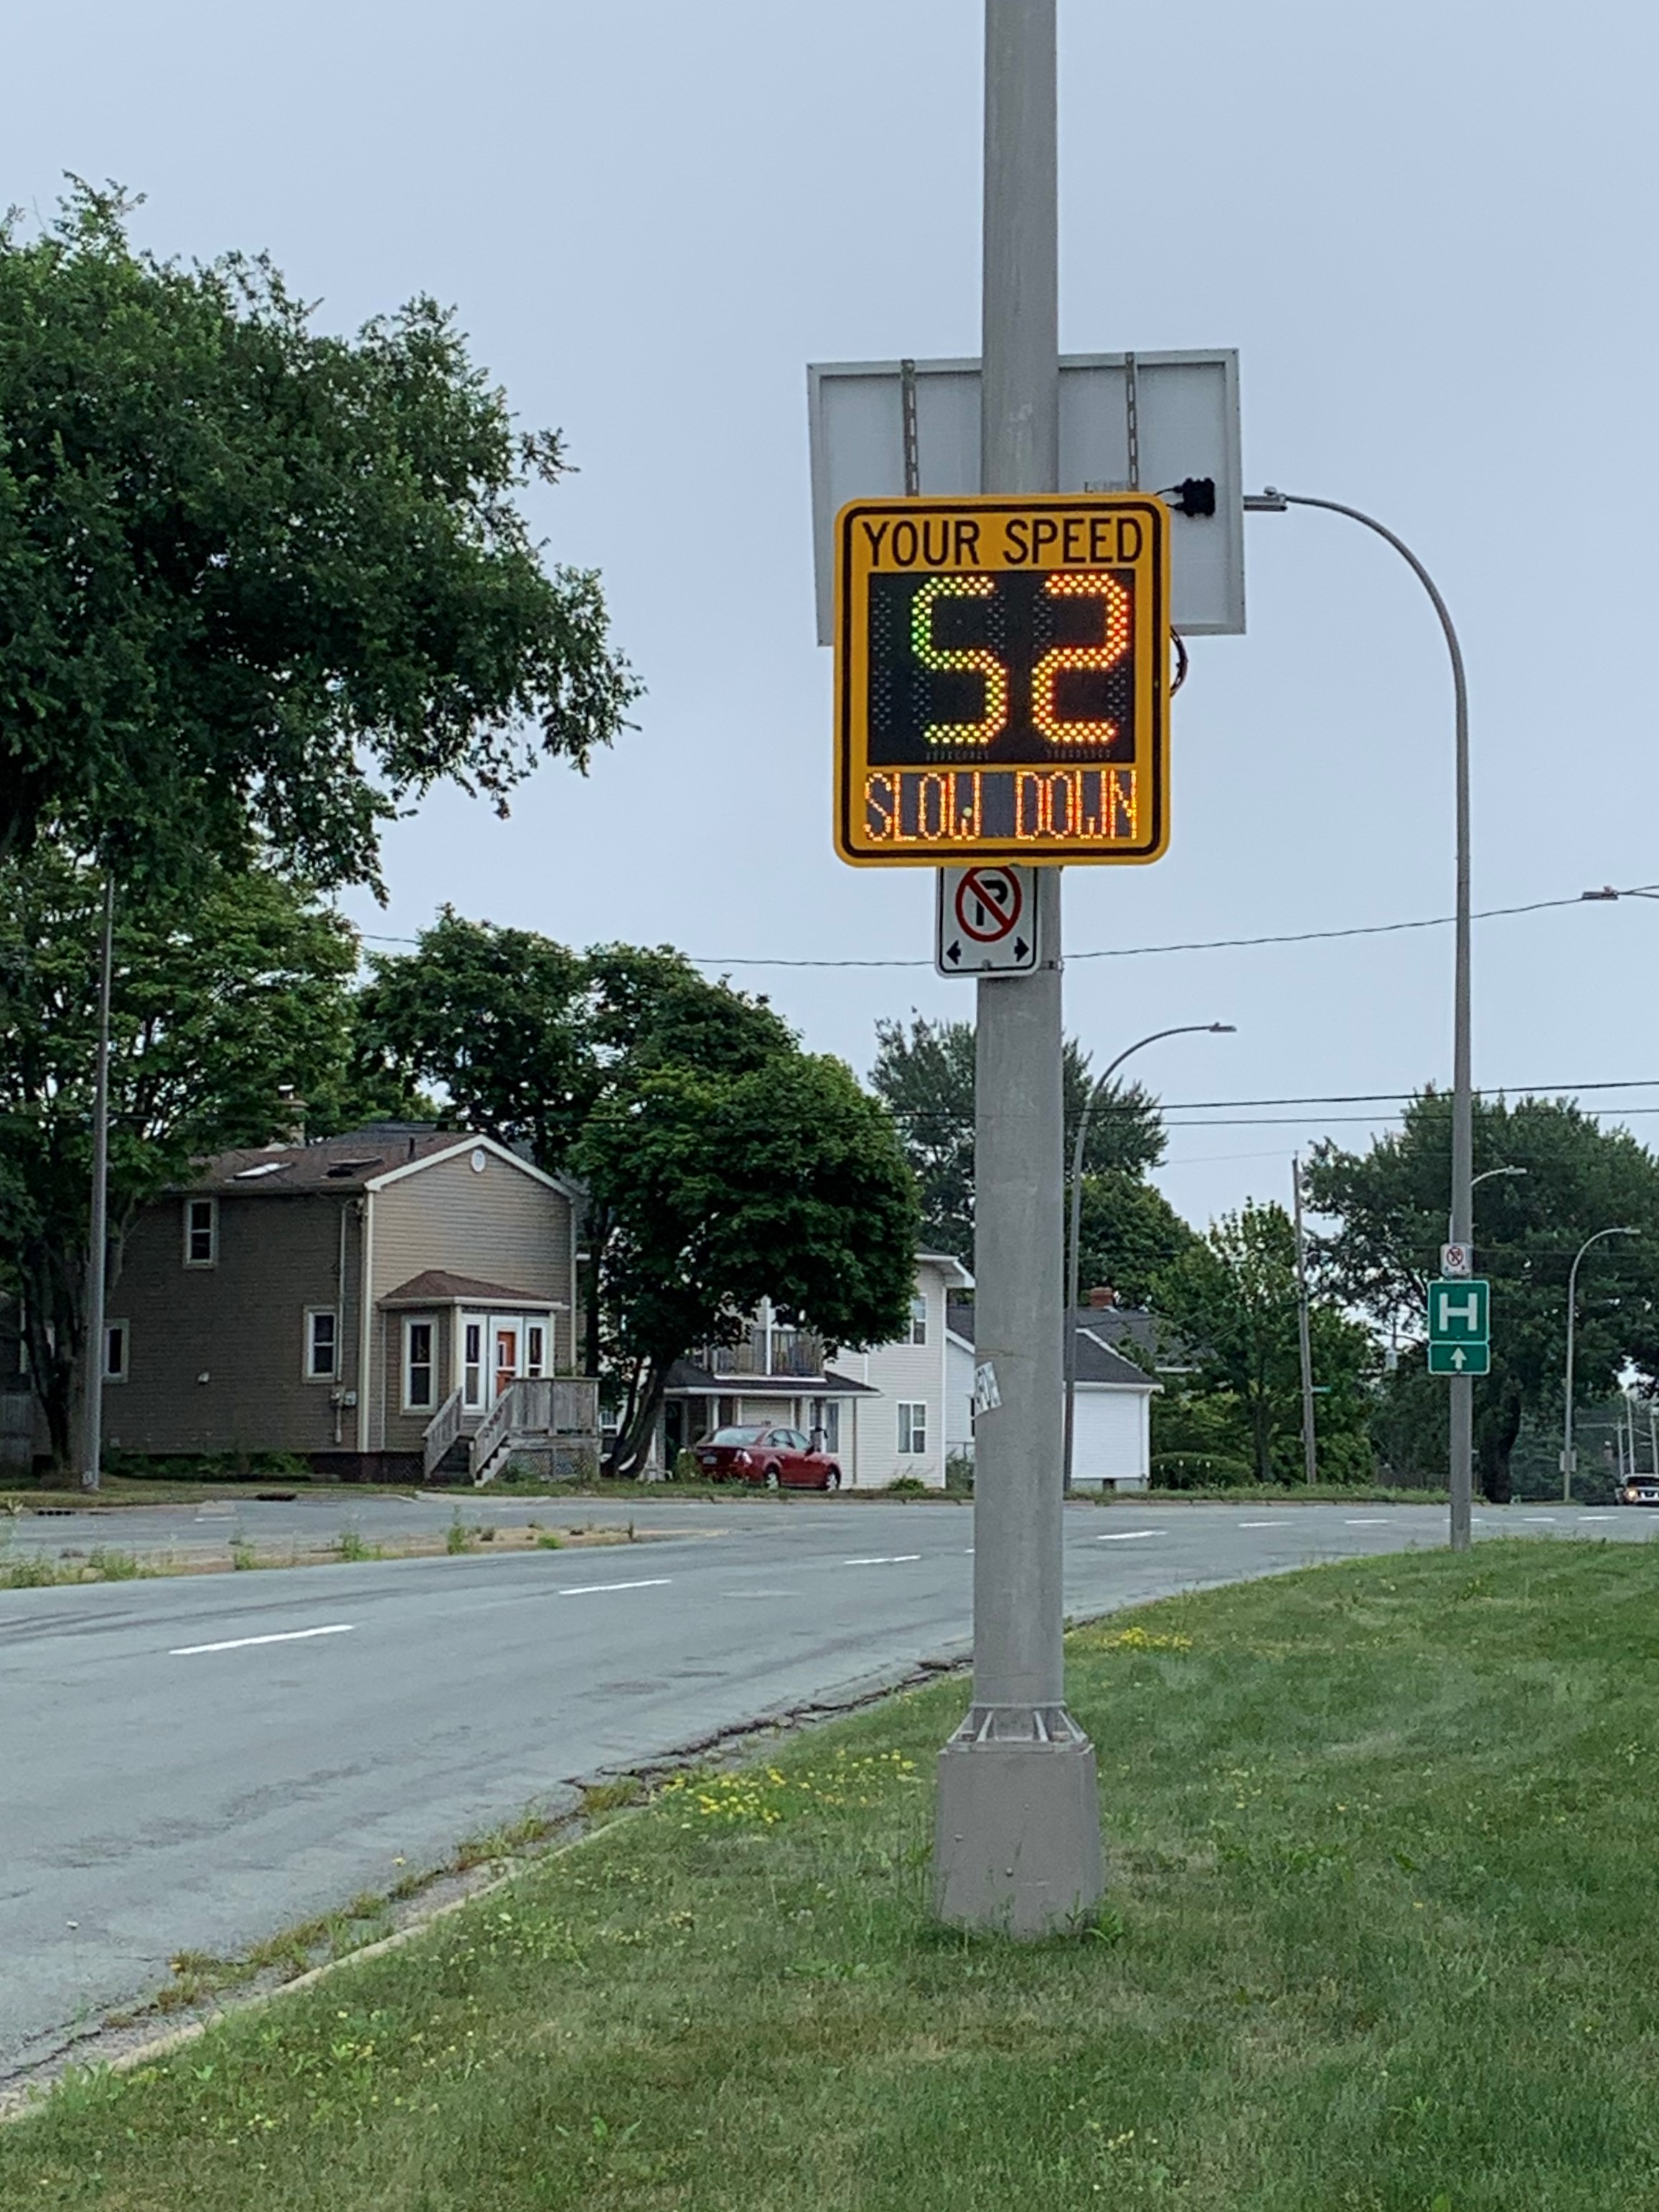 Photograph of a Speed Display Sign installed on a utility pole